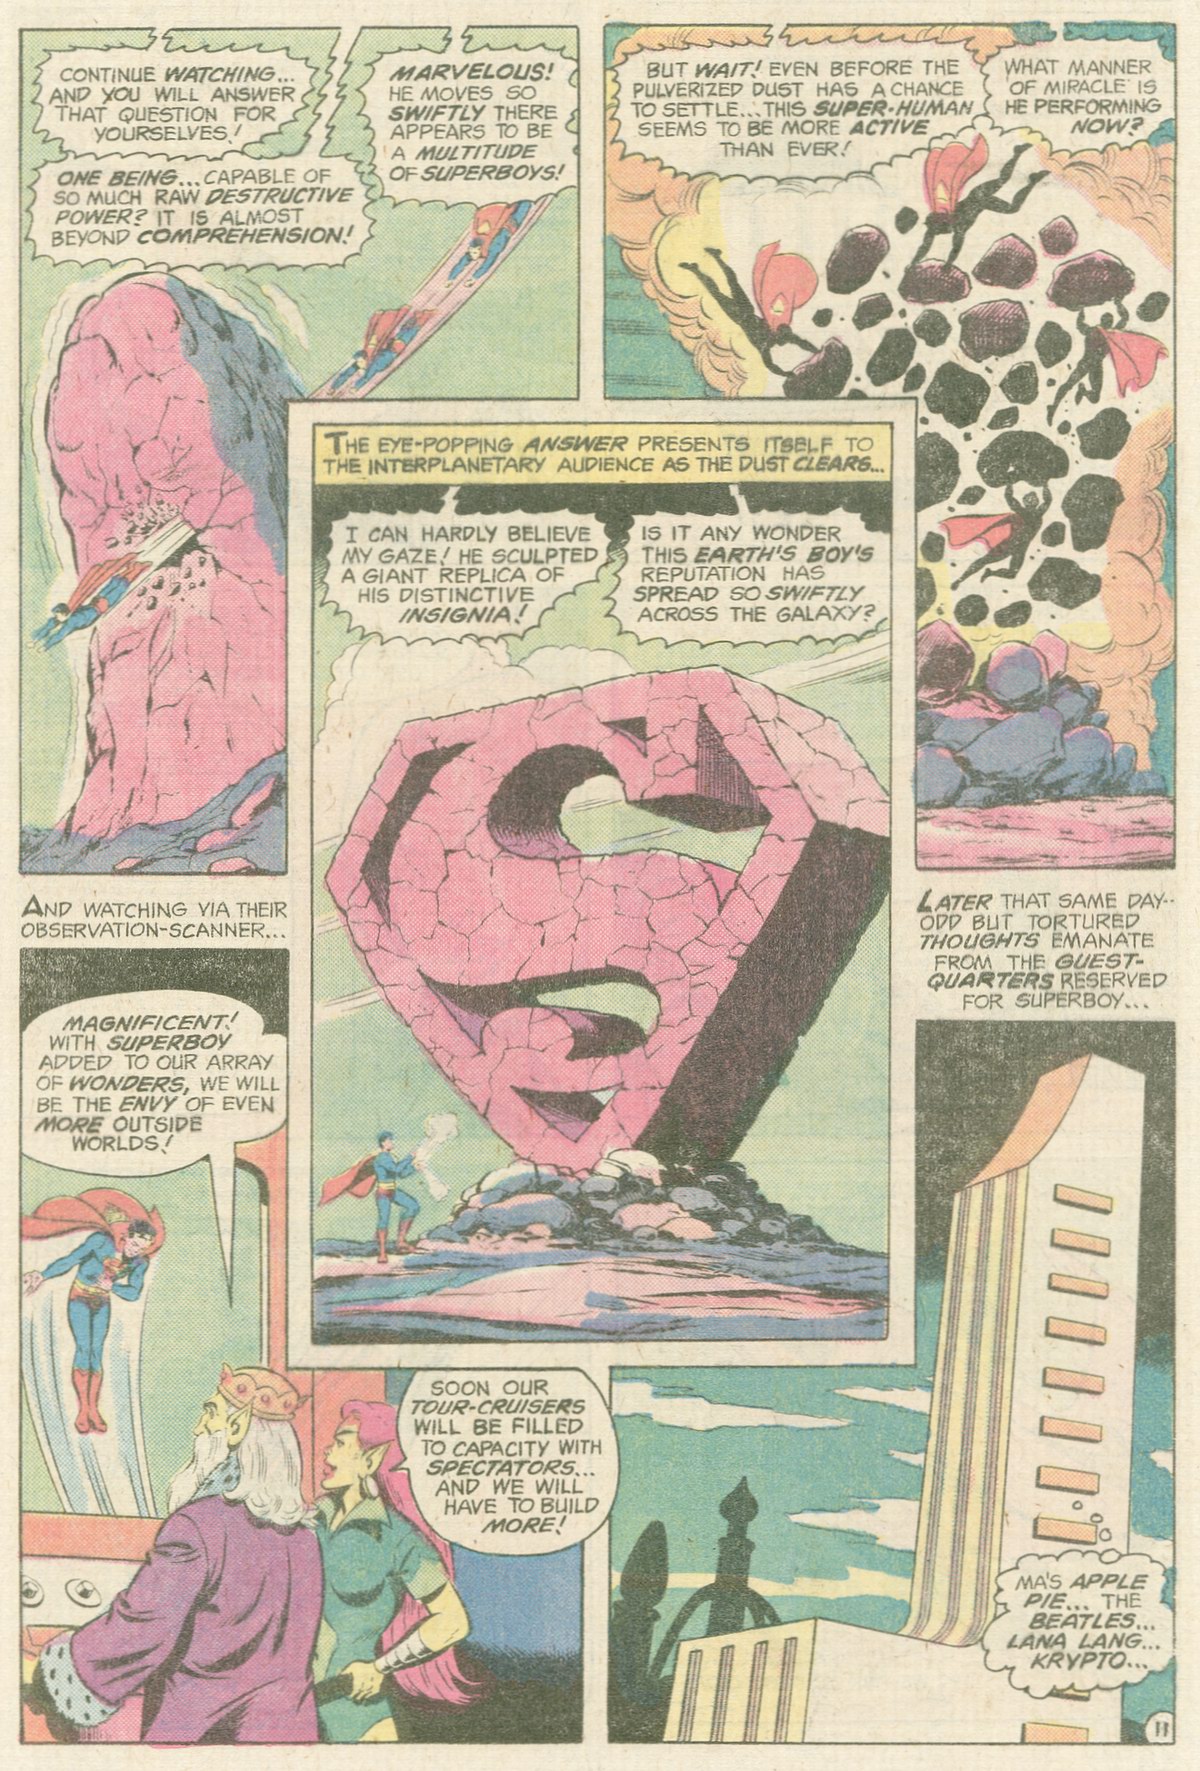 The New Adventures of Superboy 20 Page 11